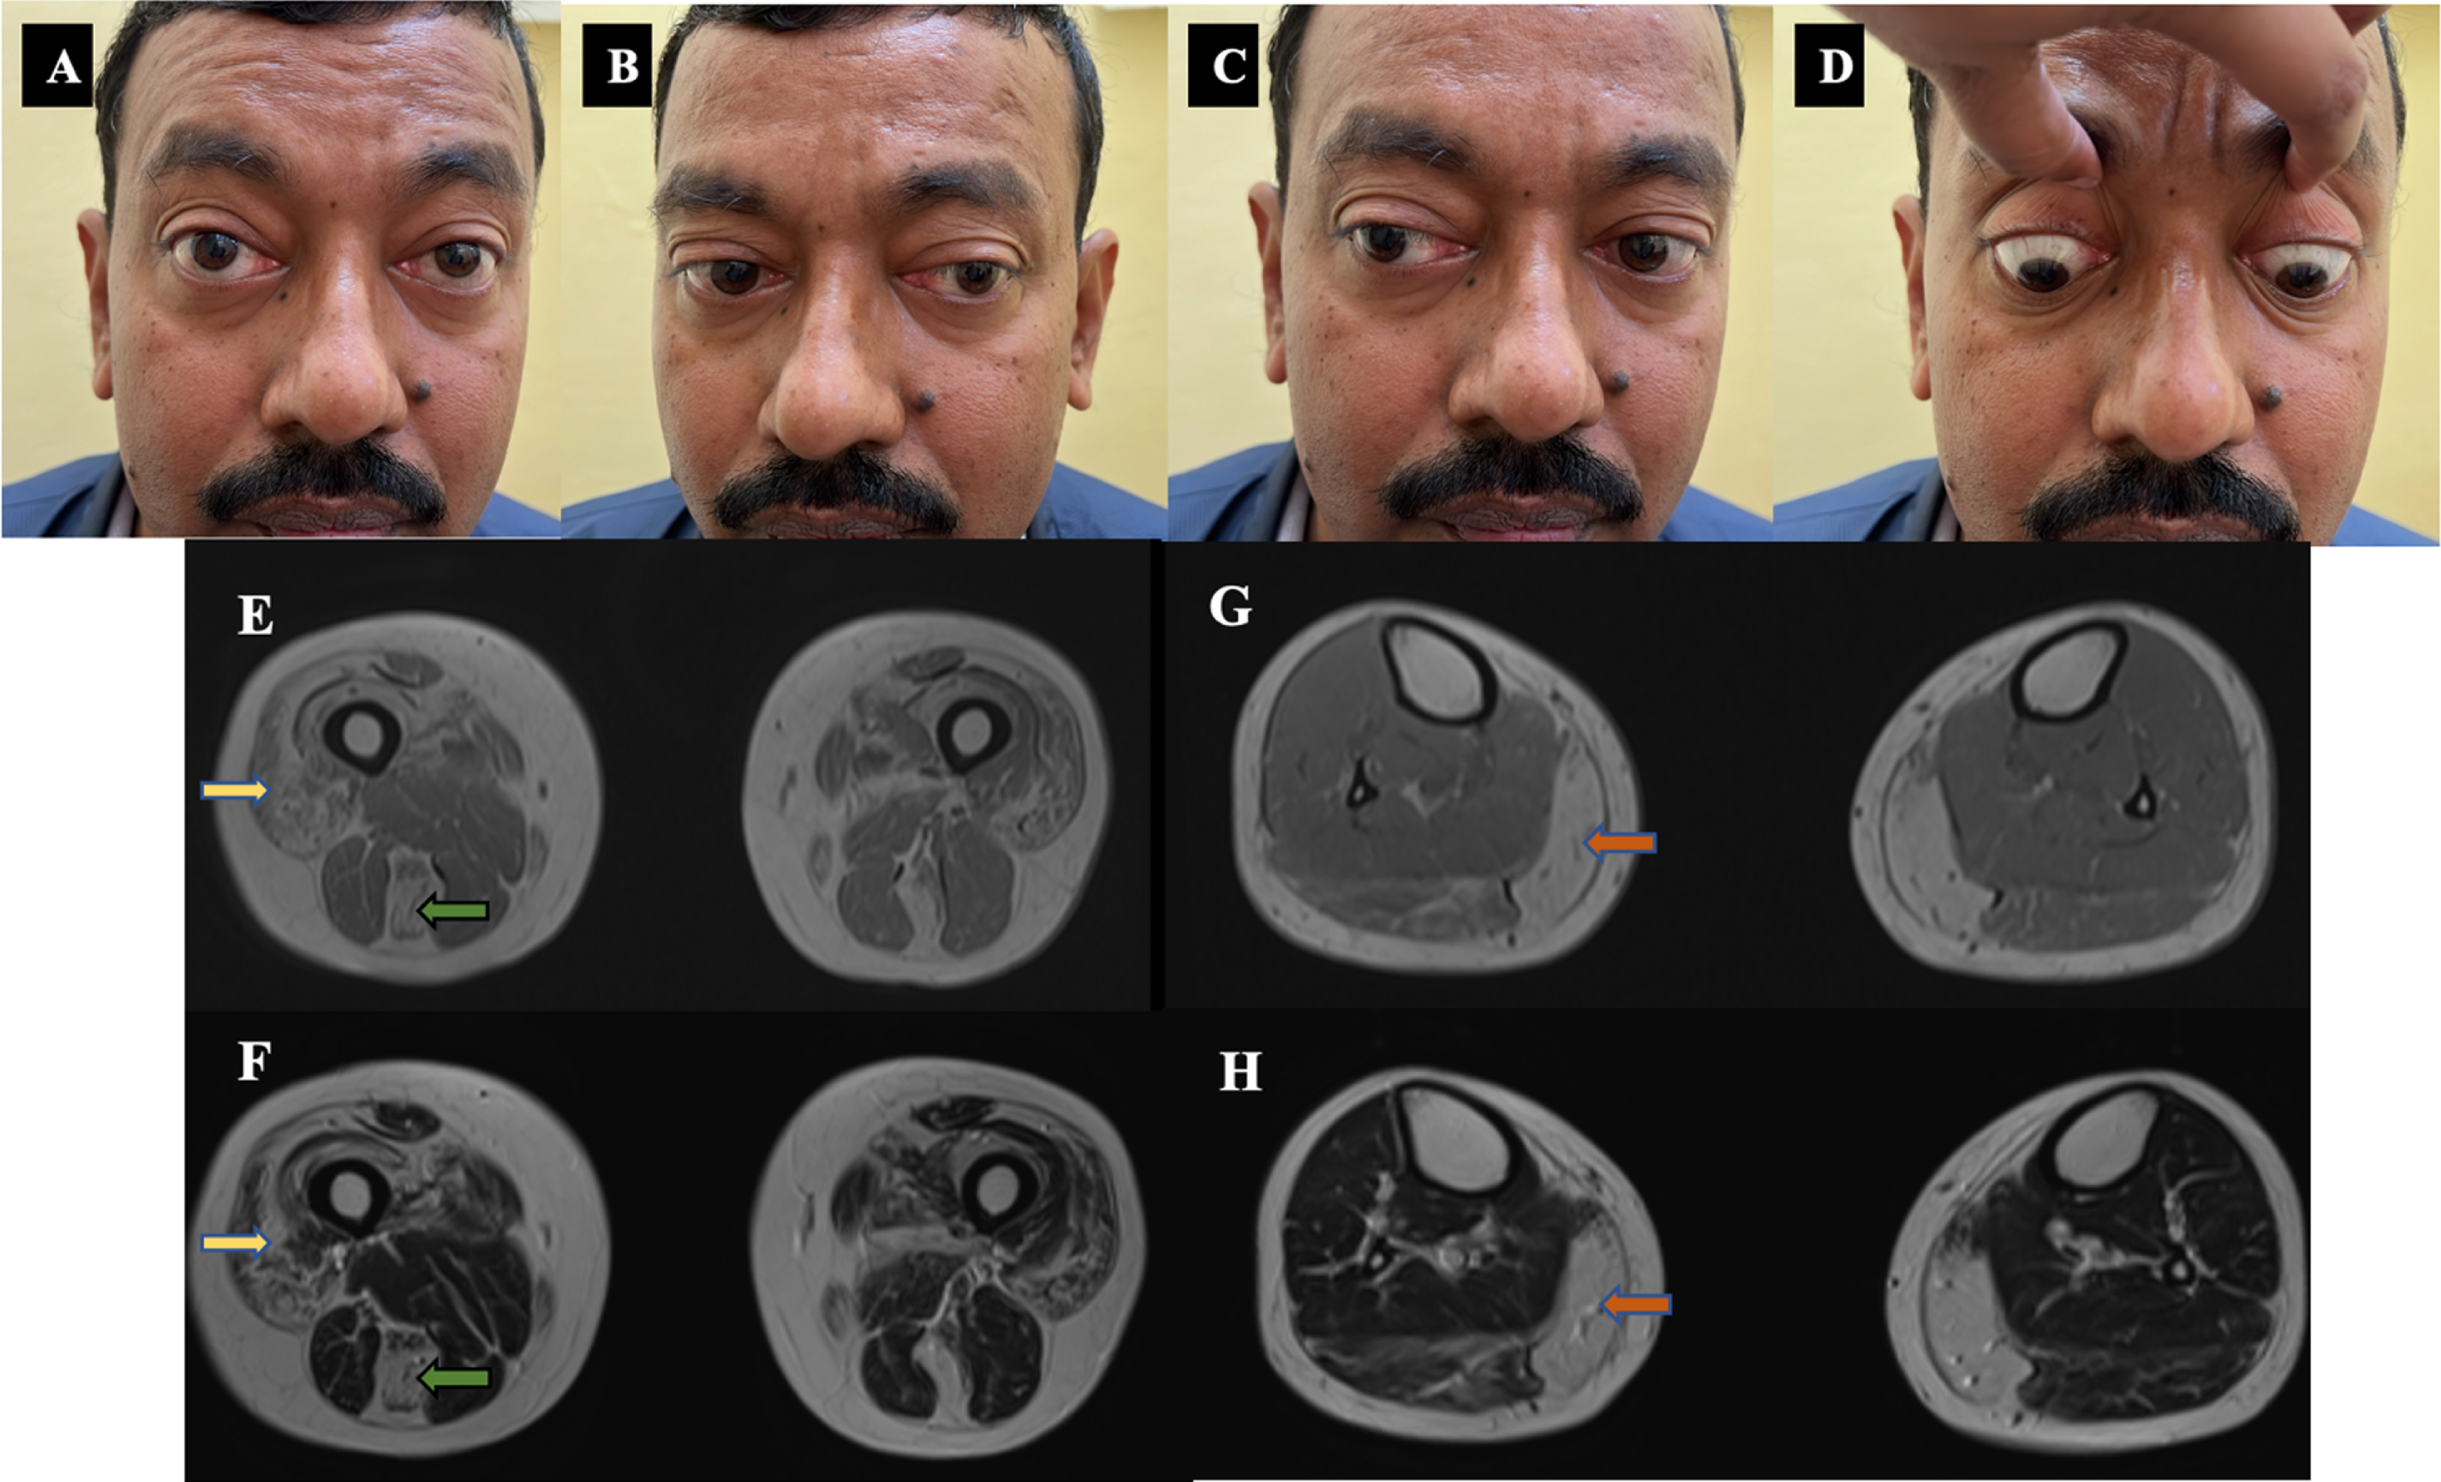 Clinical images and MRI muscle of patient –1. A, B, C, D: Clinical images - Ocular motility restriction - Abduction and upgaze restriction with proptosis. E, F, G, H: Muscle MRI images - E- T1 W, F-T2 W images showing quadriceps (yellow arrow), semitendinosus (green arrow) fatty infiltration. G-T1 W, H-T2 W images showing predominant medial gastrocnemius (orange arrow) fatty infiltration with sparing of anterior leg muscles.